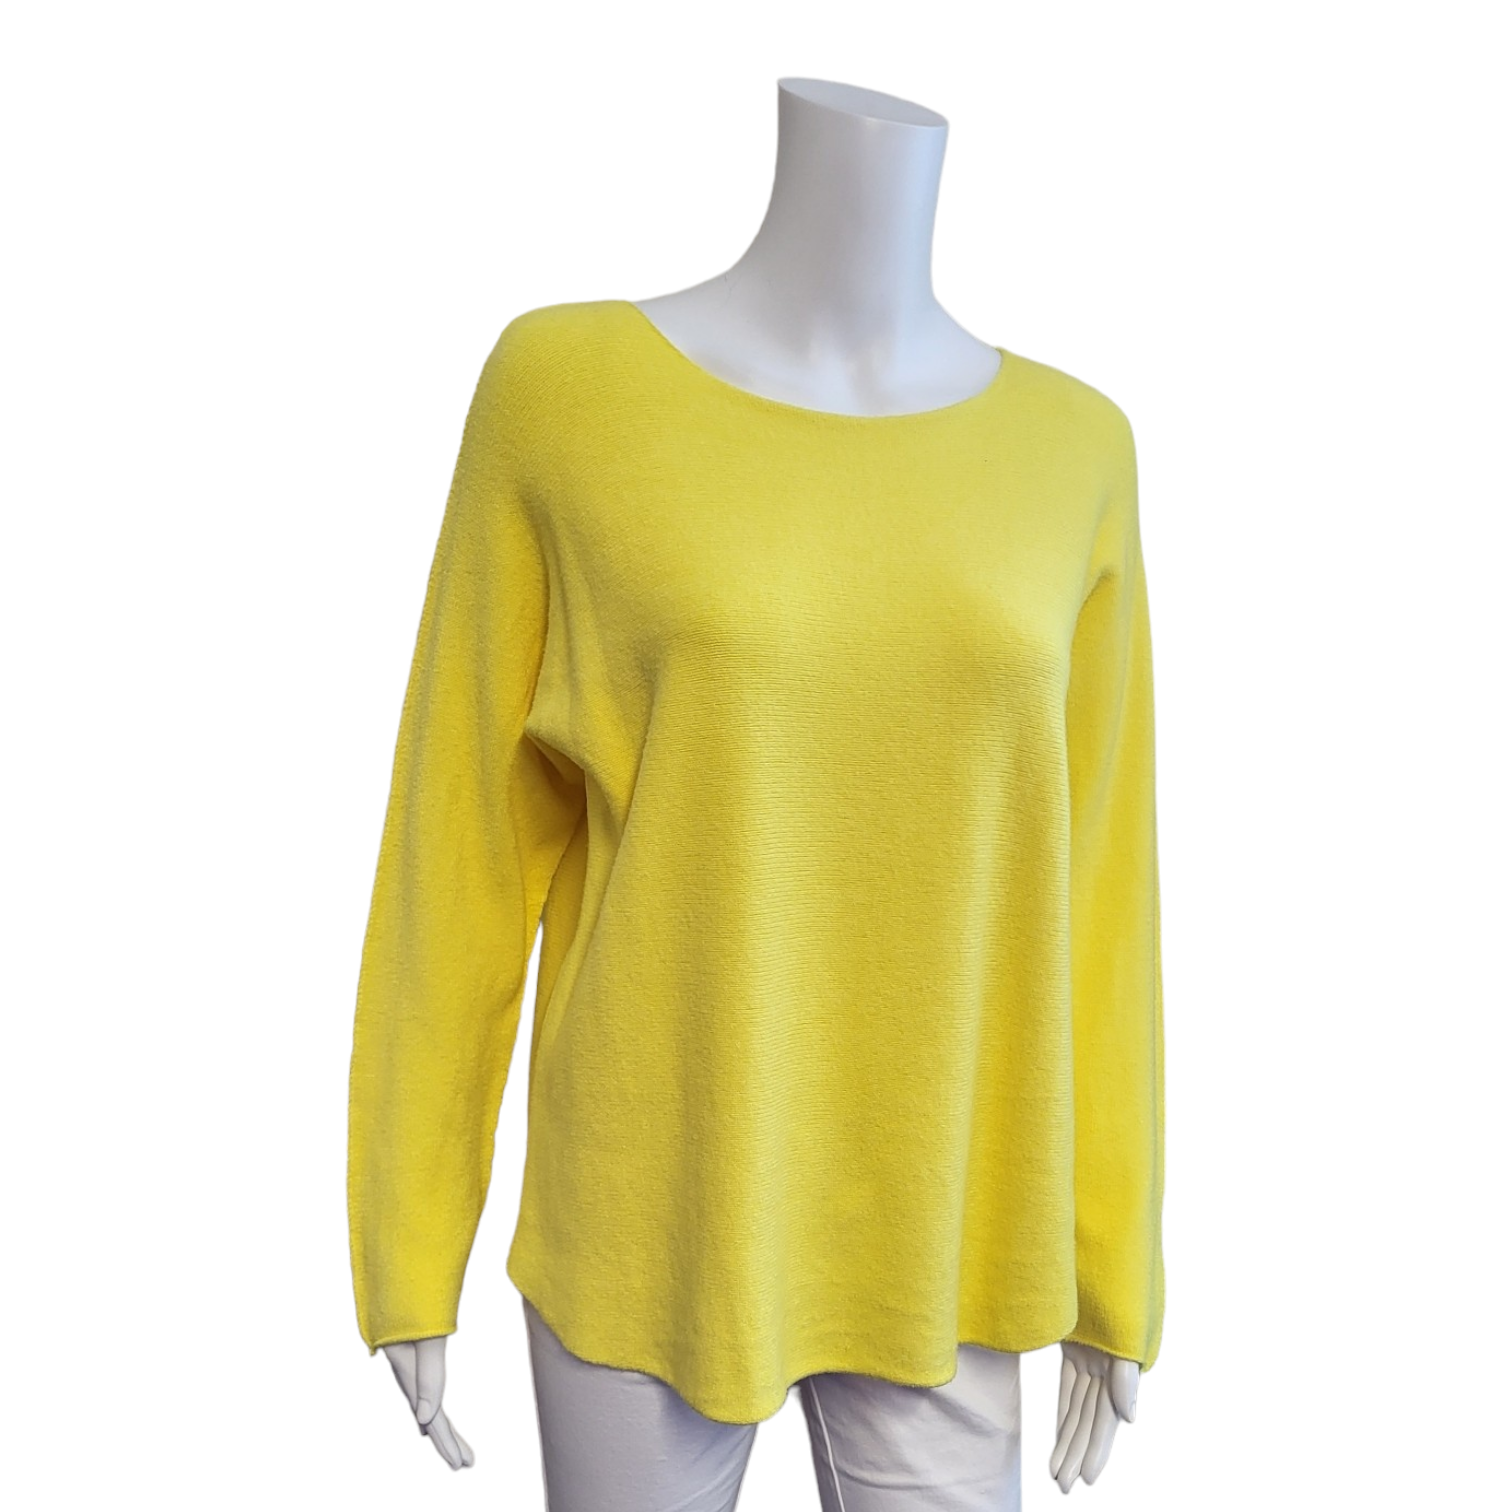 Yellow long sleeved jumper with round neck.